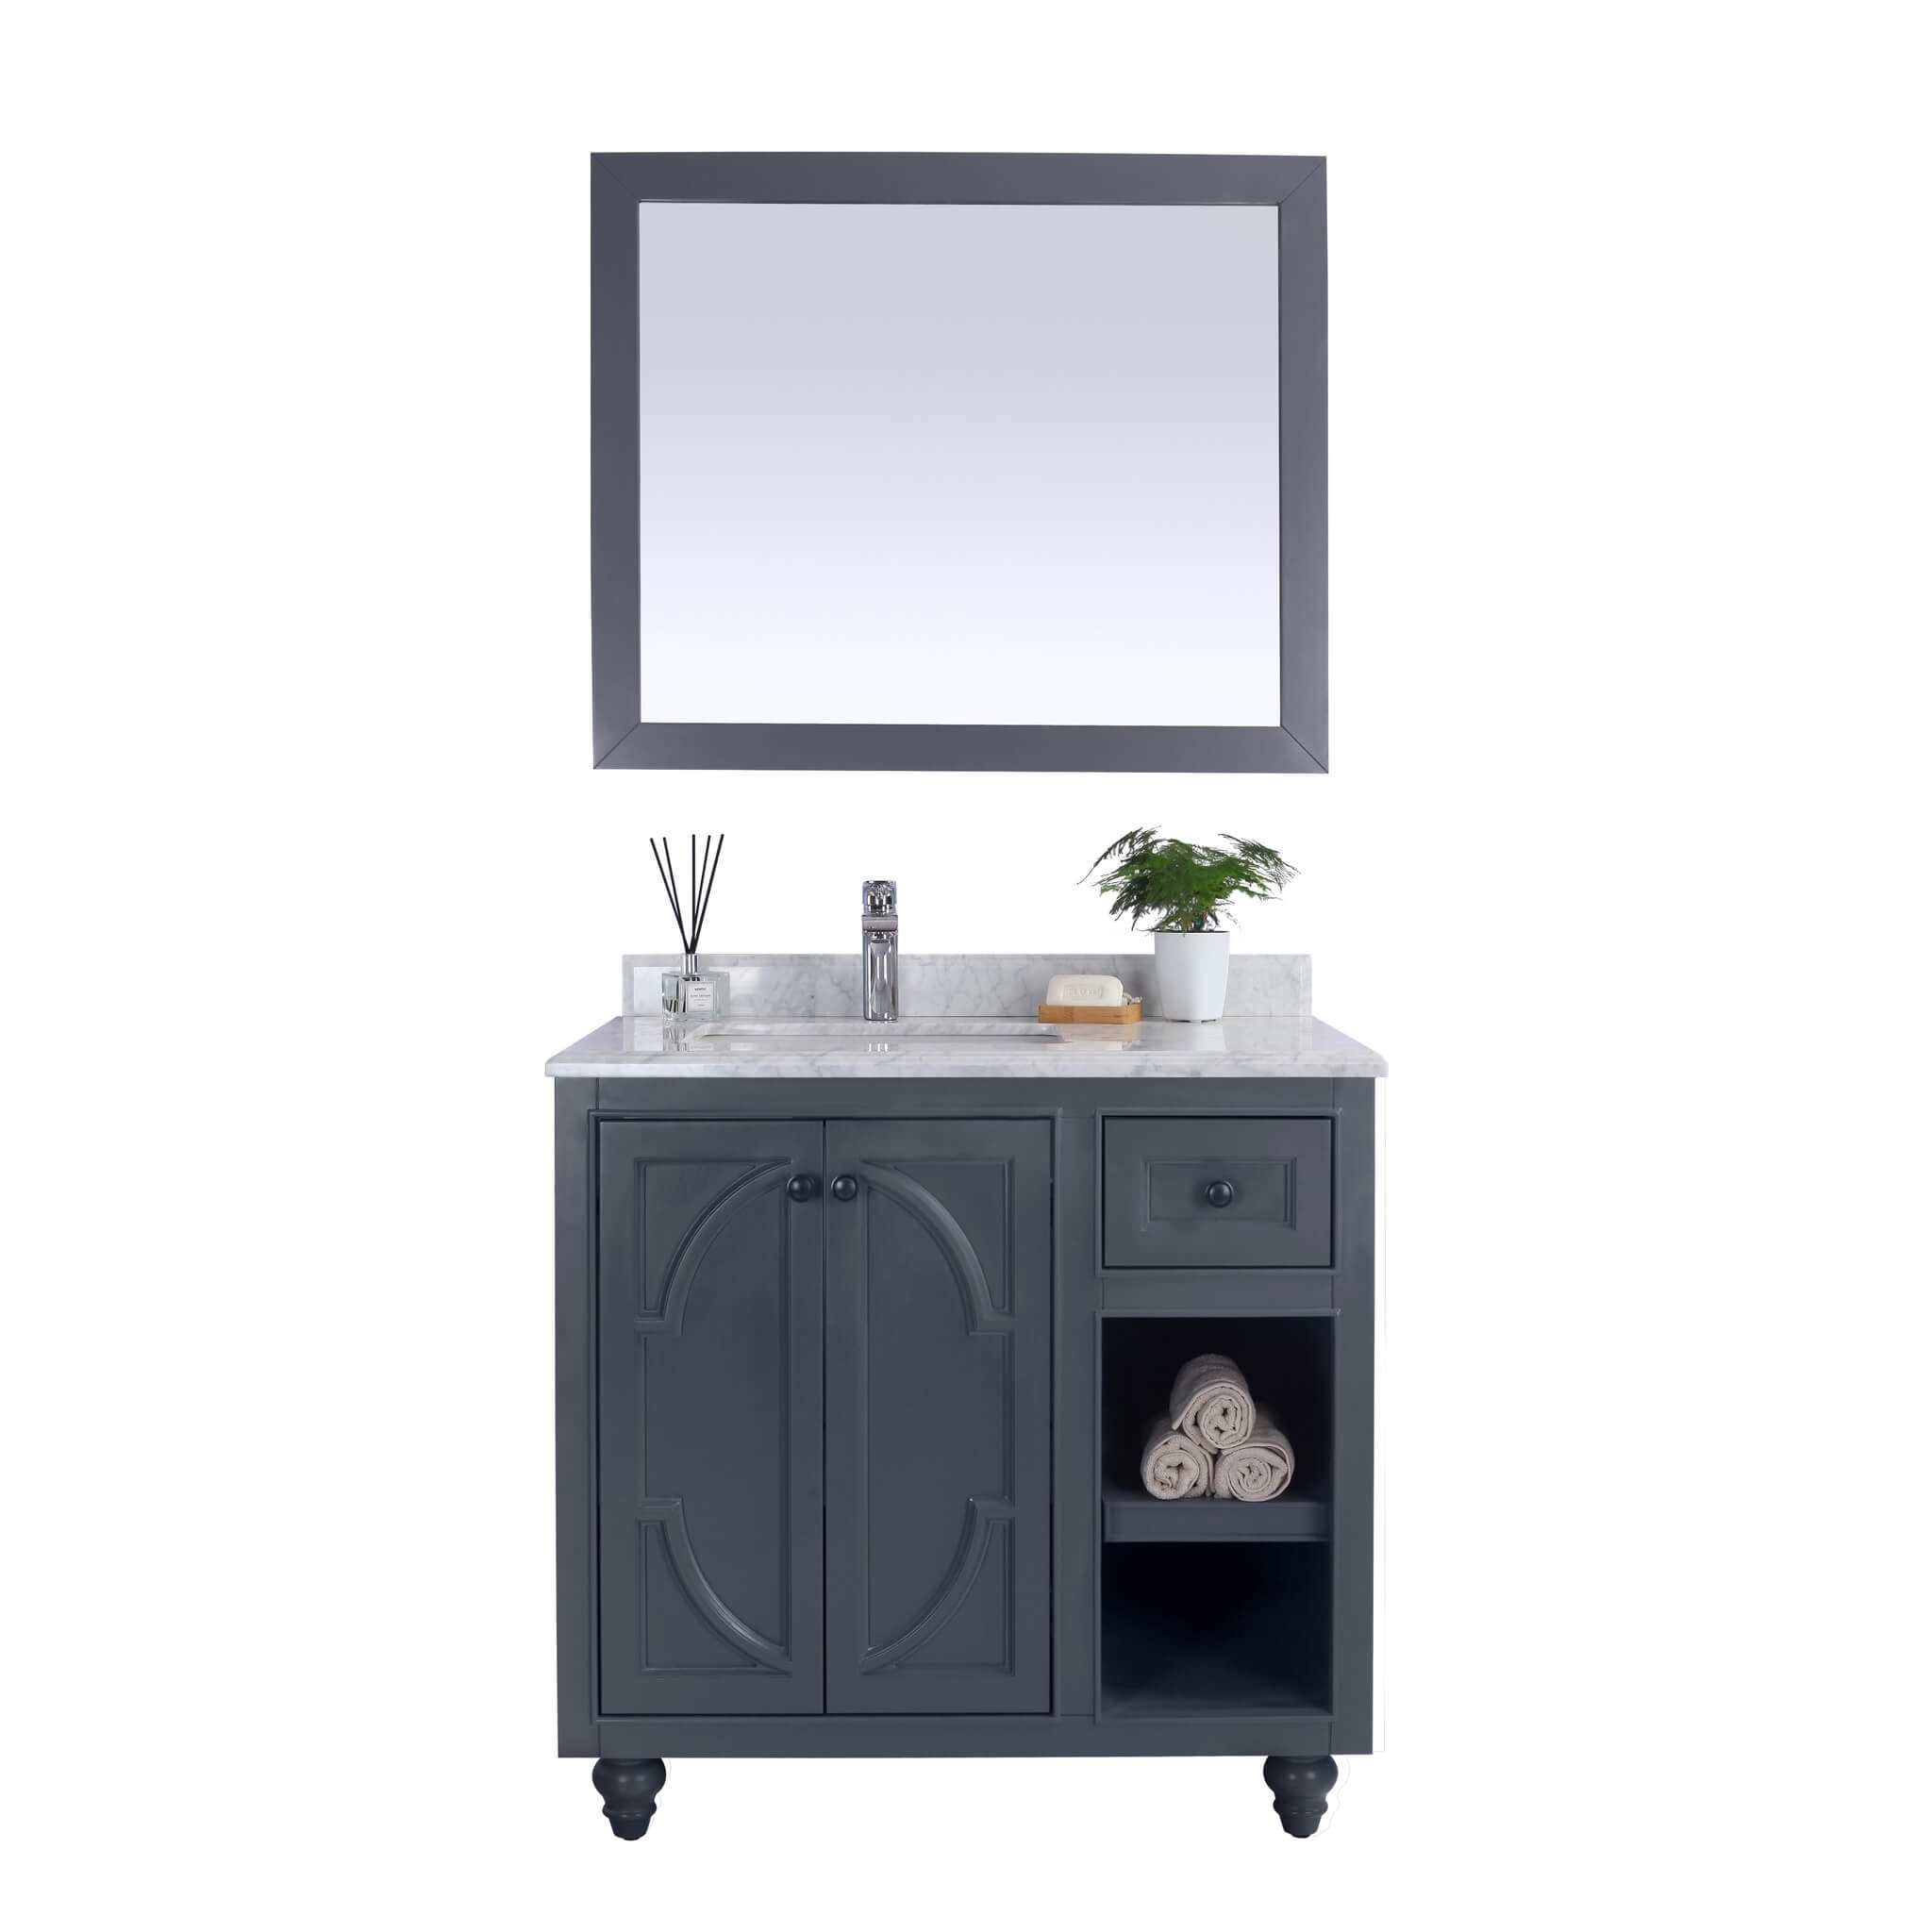 LAVIVA Odyssey 313613-36G-WC 36" Single Bathroom Vanity in Maple Grey with White Carrara Marble, White Rectangle Sink, Front View